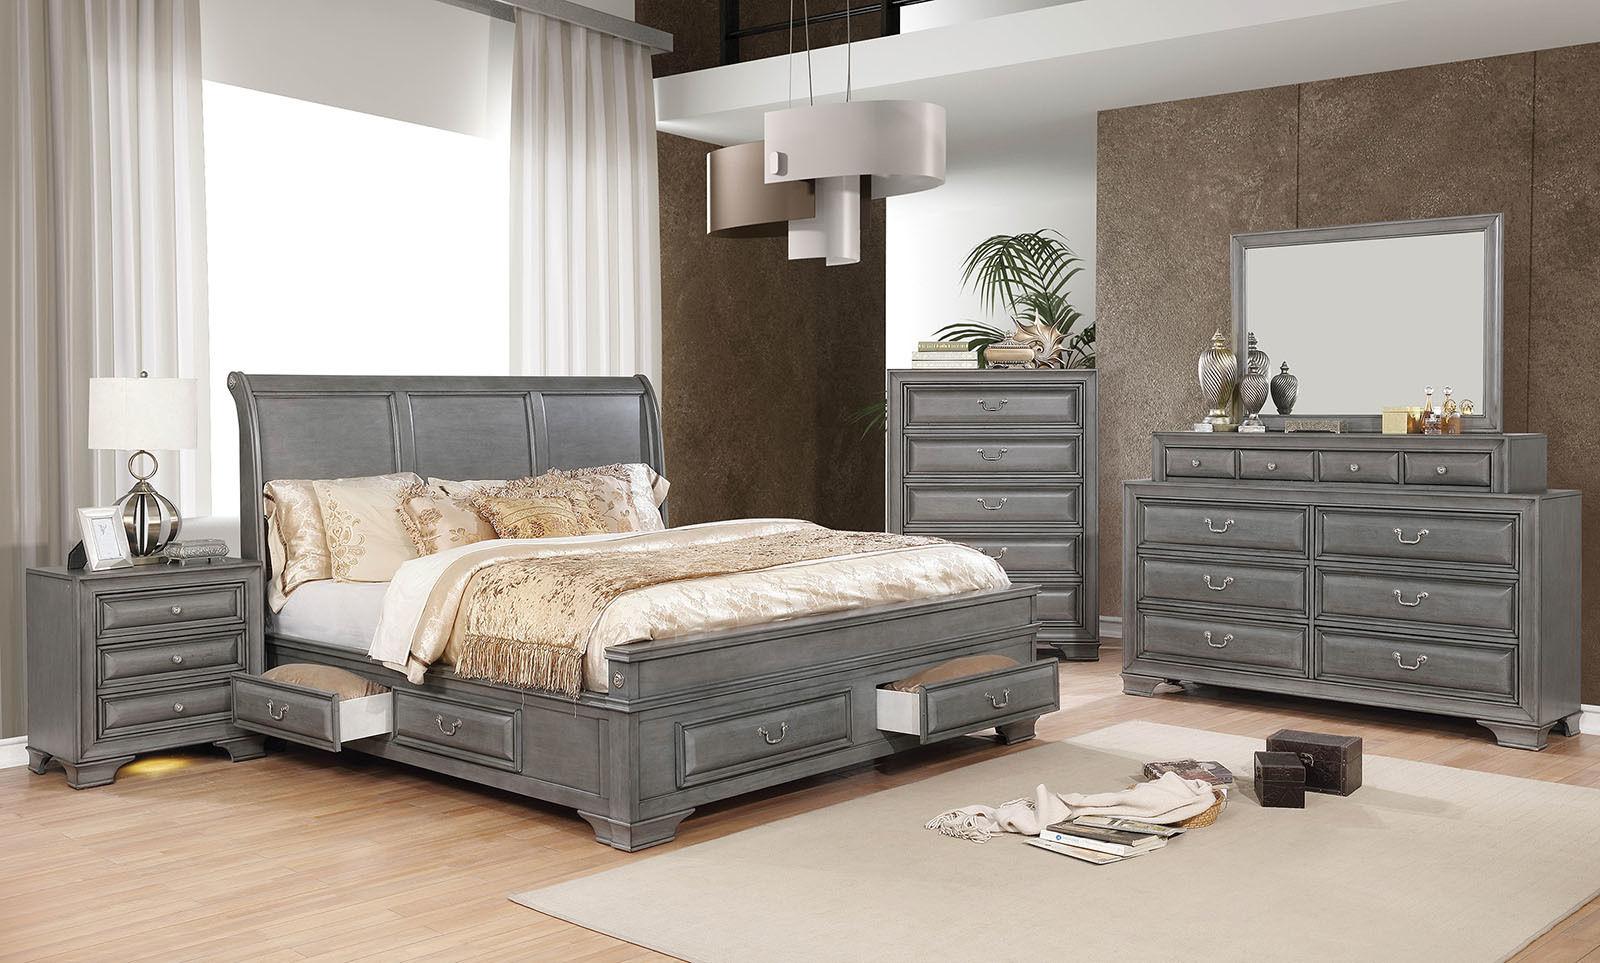 Transitional Storage Bedroom Set CM7302GY-Q-6PC Brandt CM7302GY-Q-6PC in Gray 